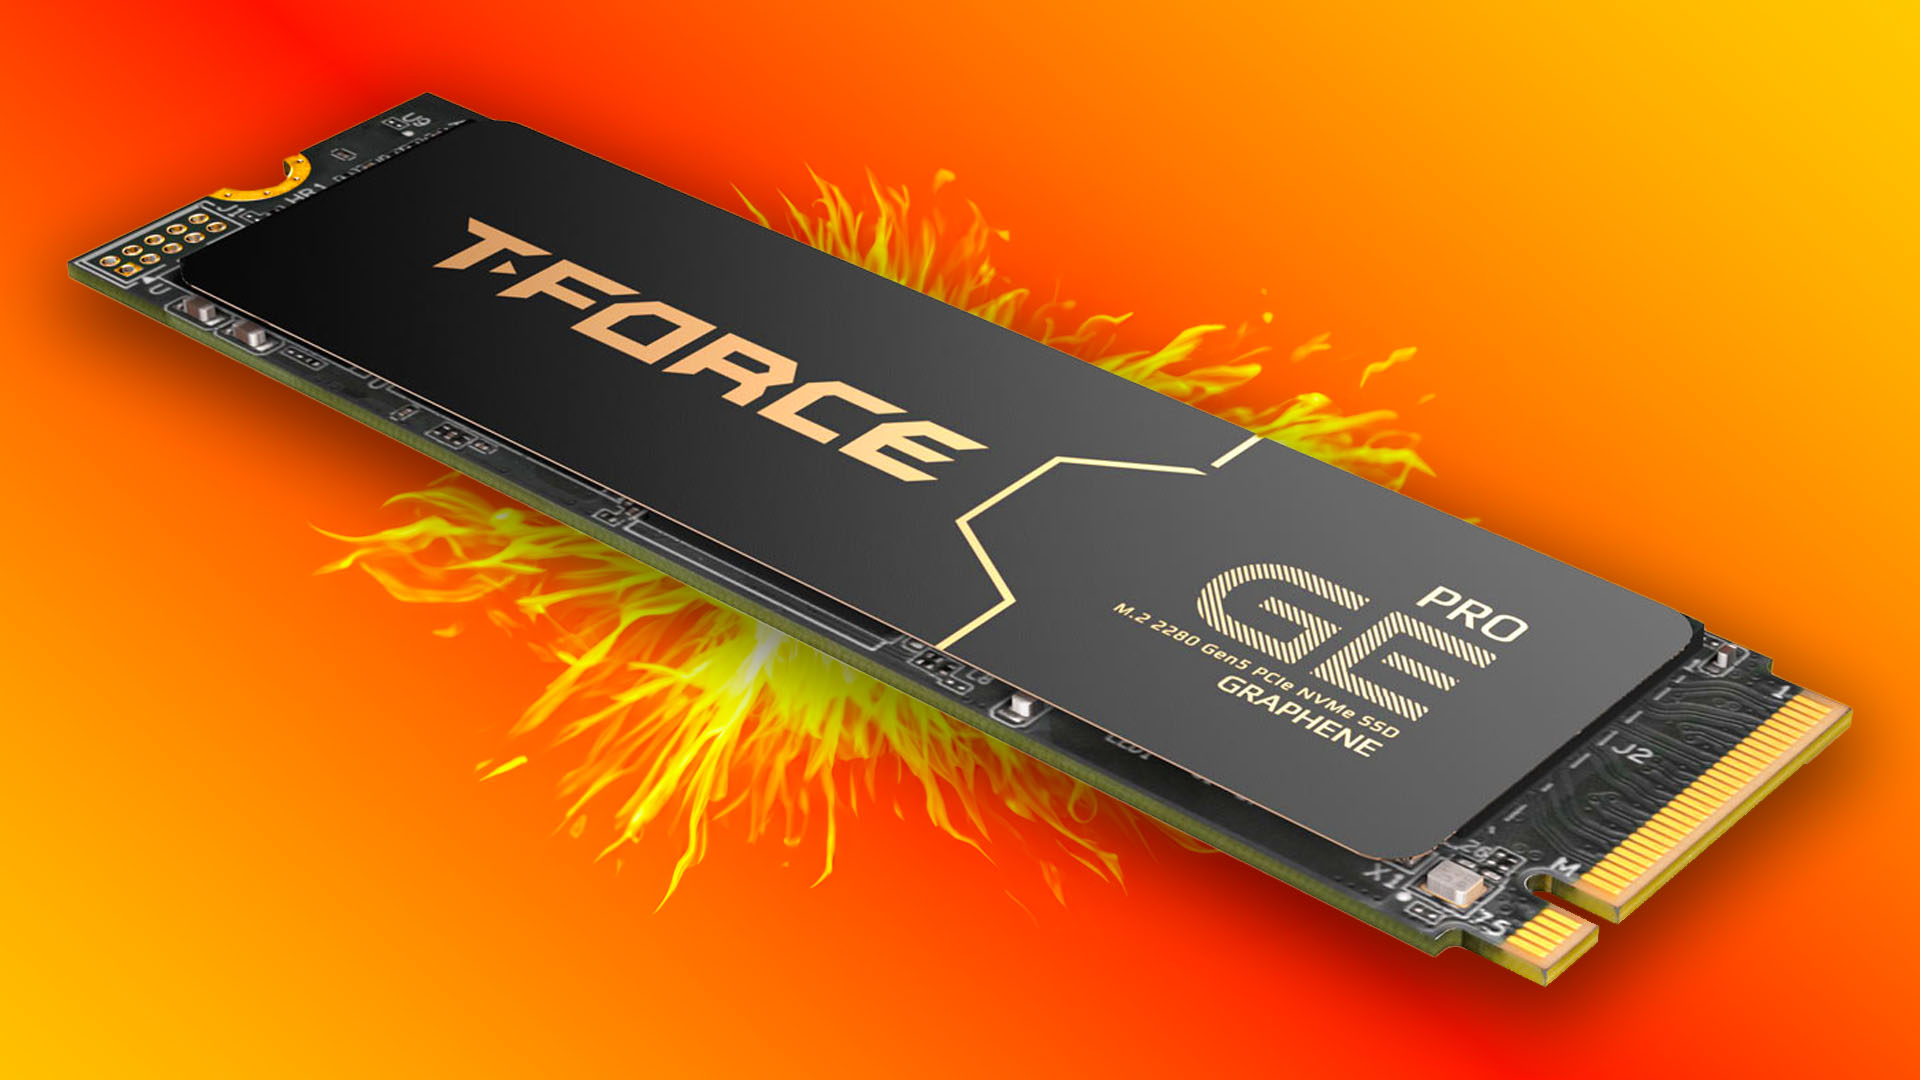 This new super-fast SSD beats any drive from Corsair and Crucial